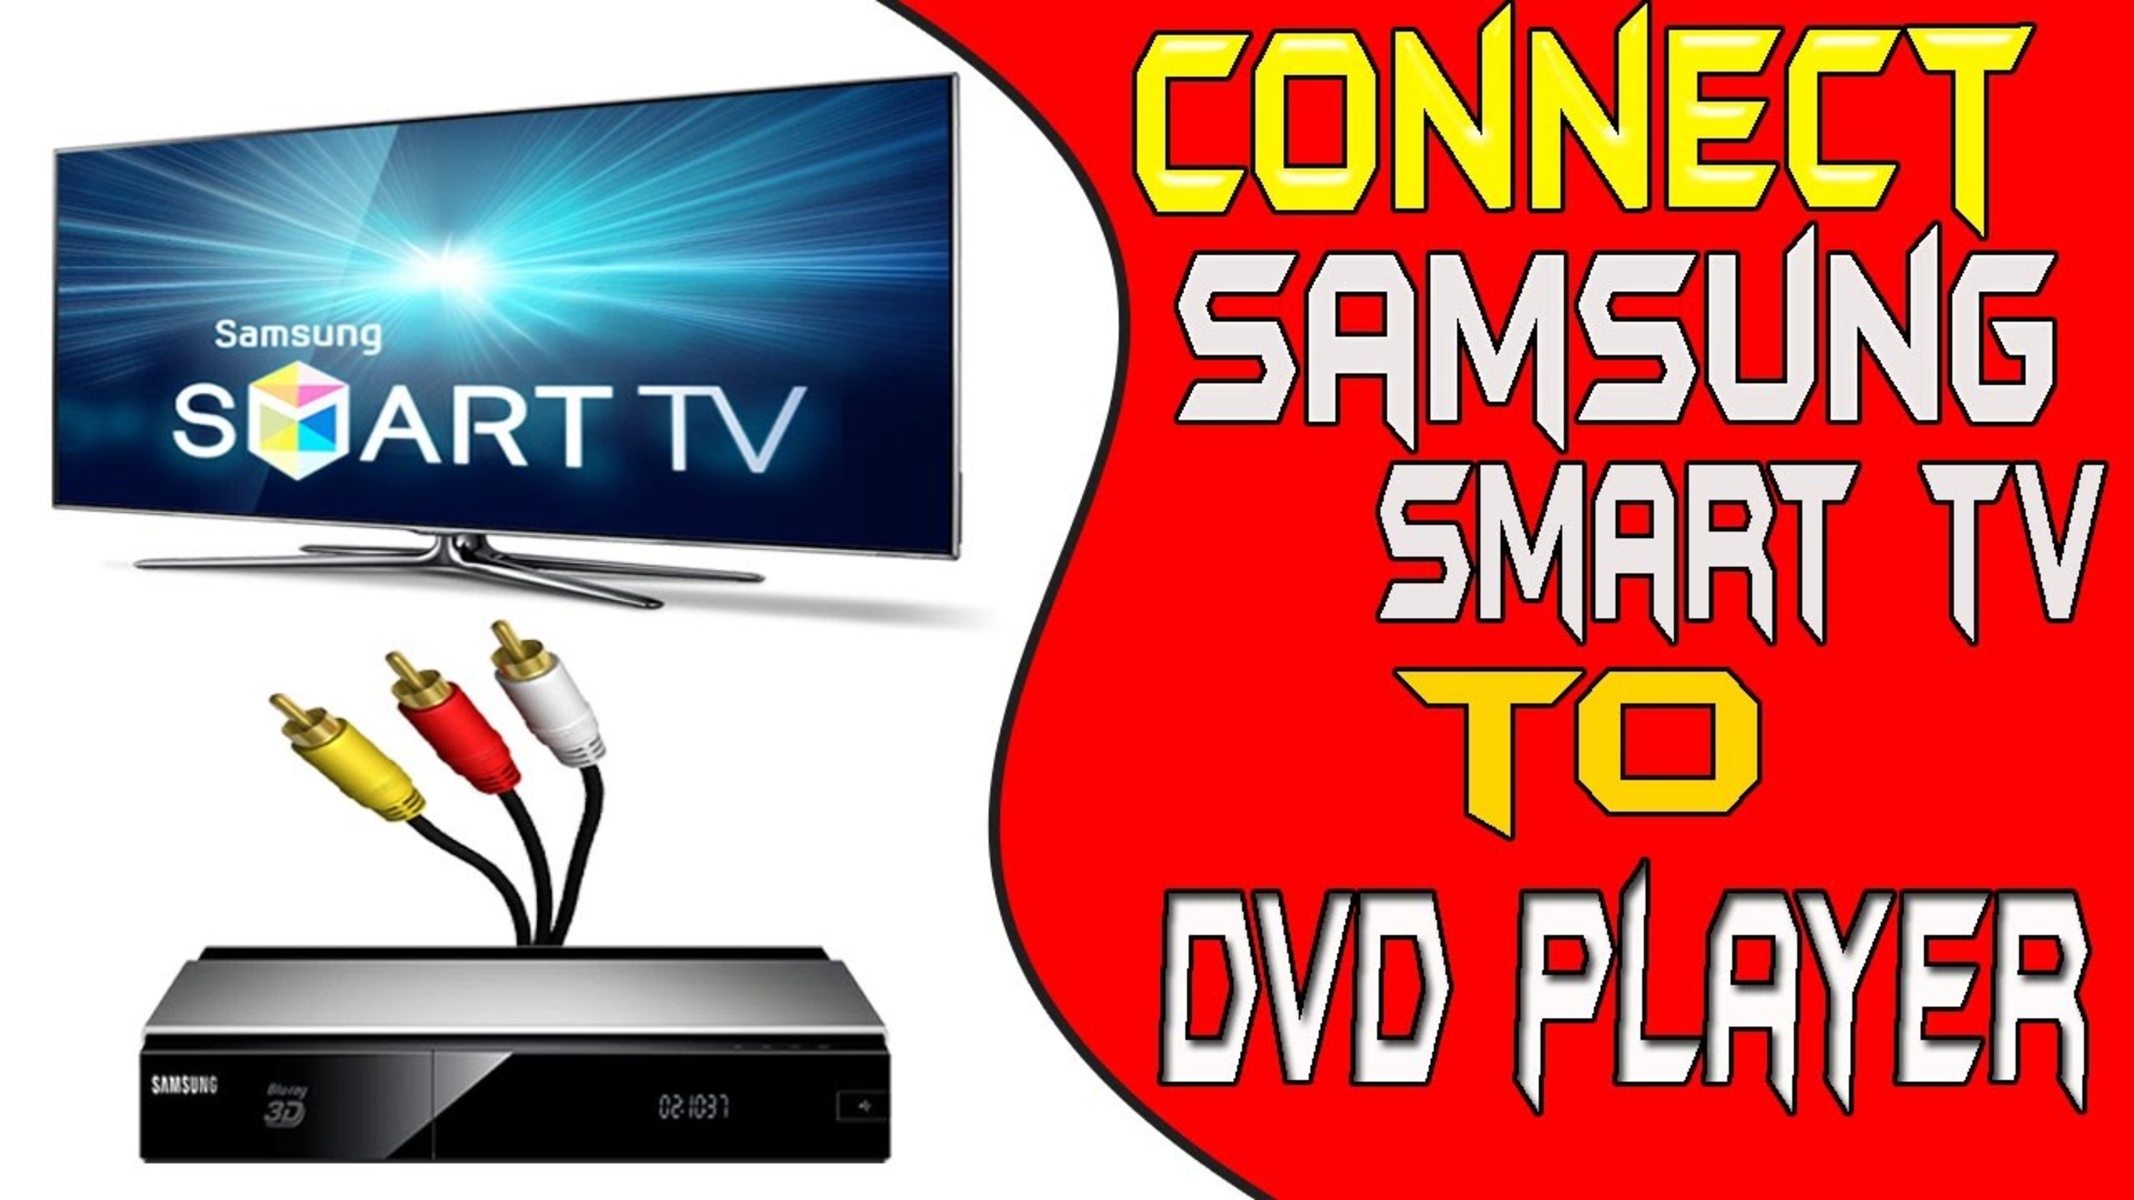 how-to-connect-dvd-player-to-samsung-smart-tv-without-hdmi